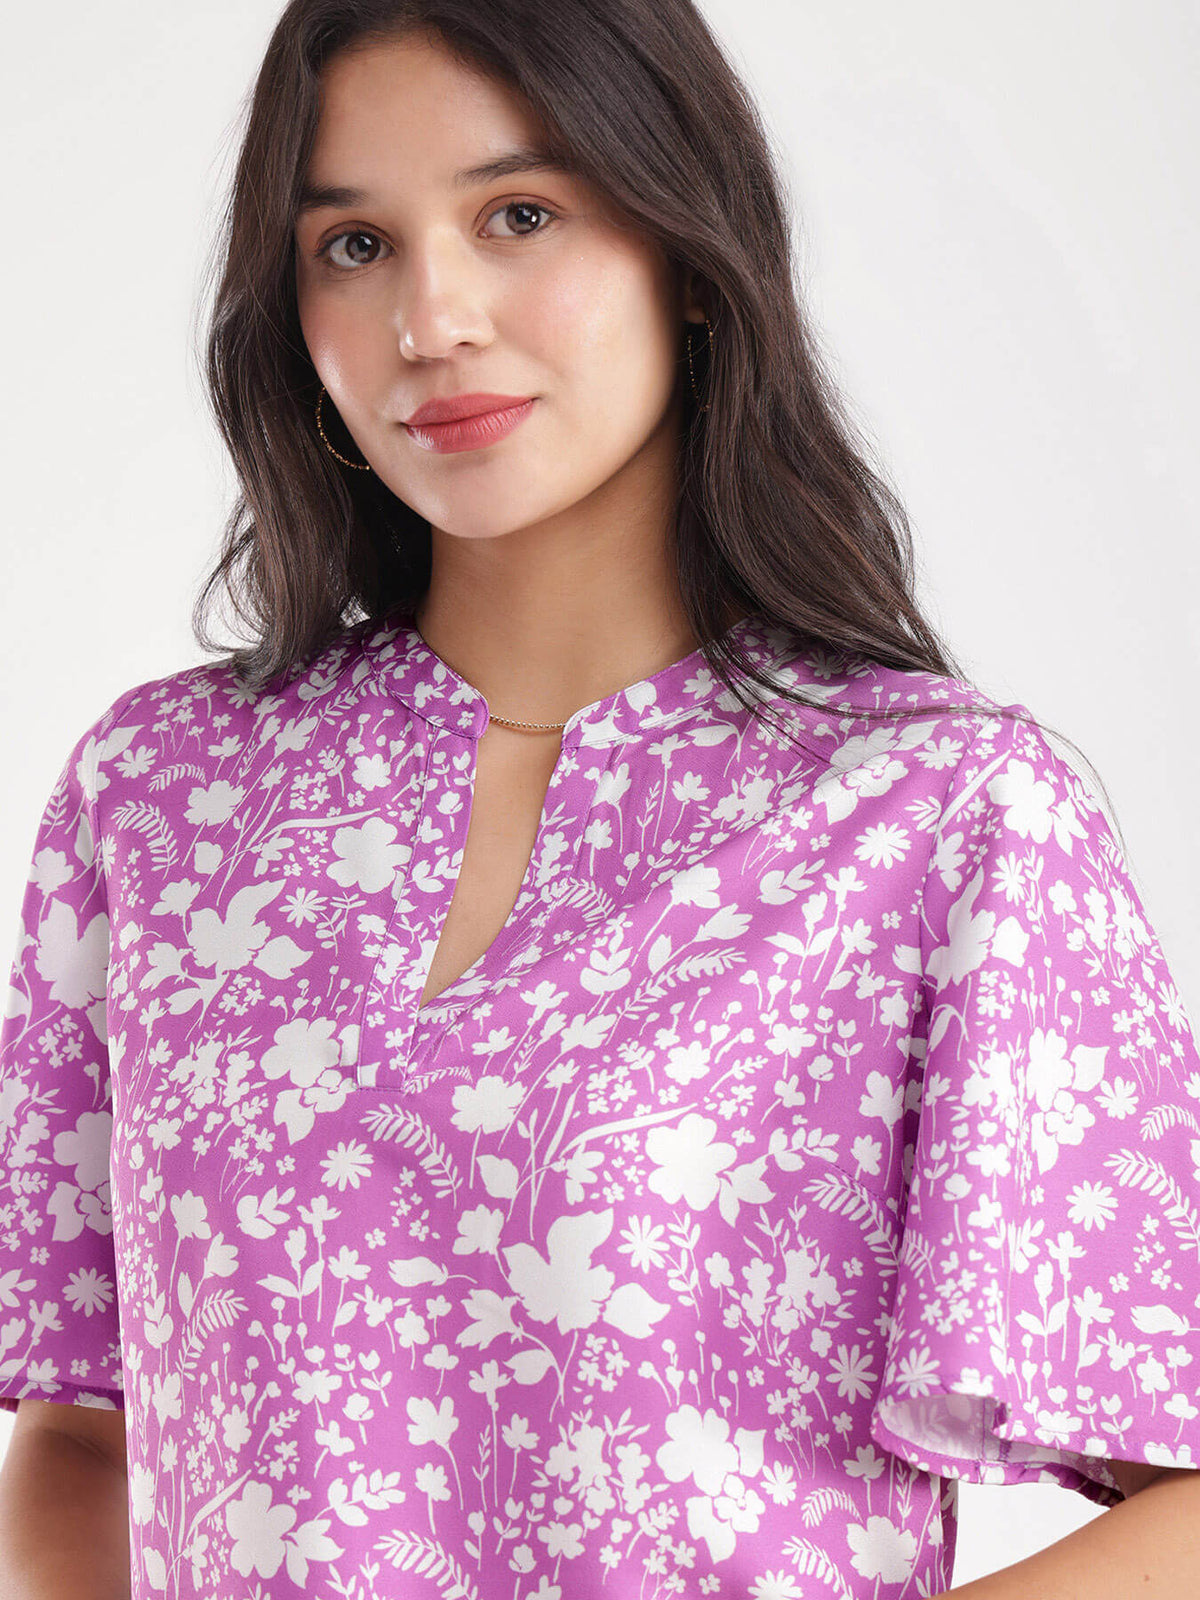 Floral Print Top - Lilac And White